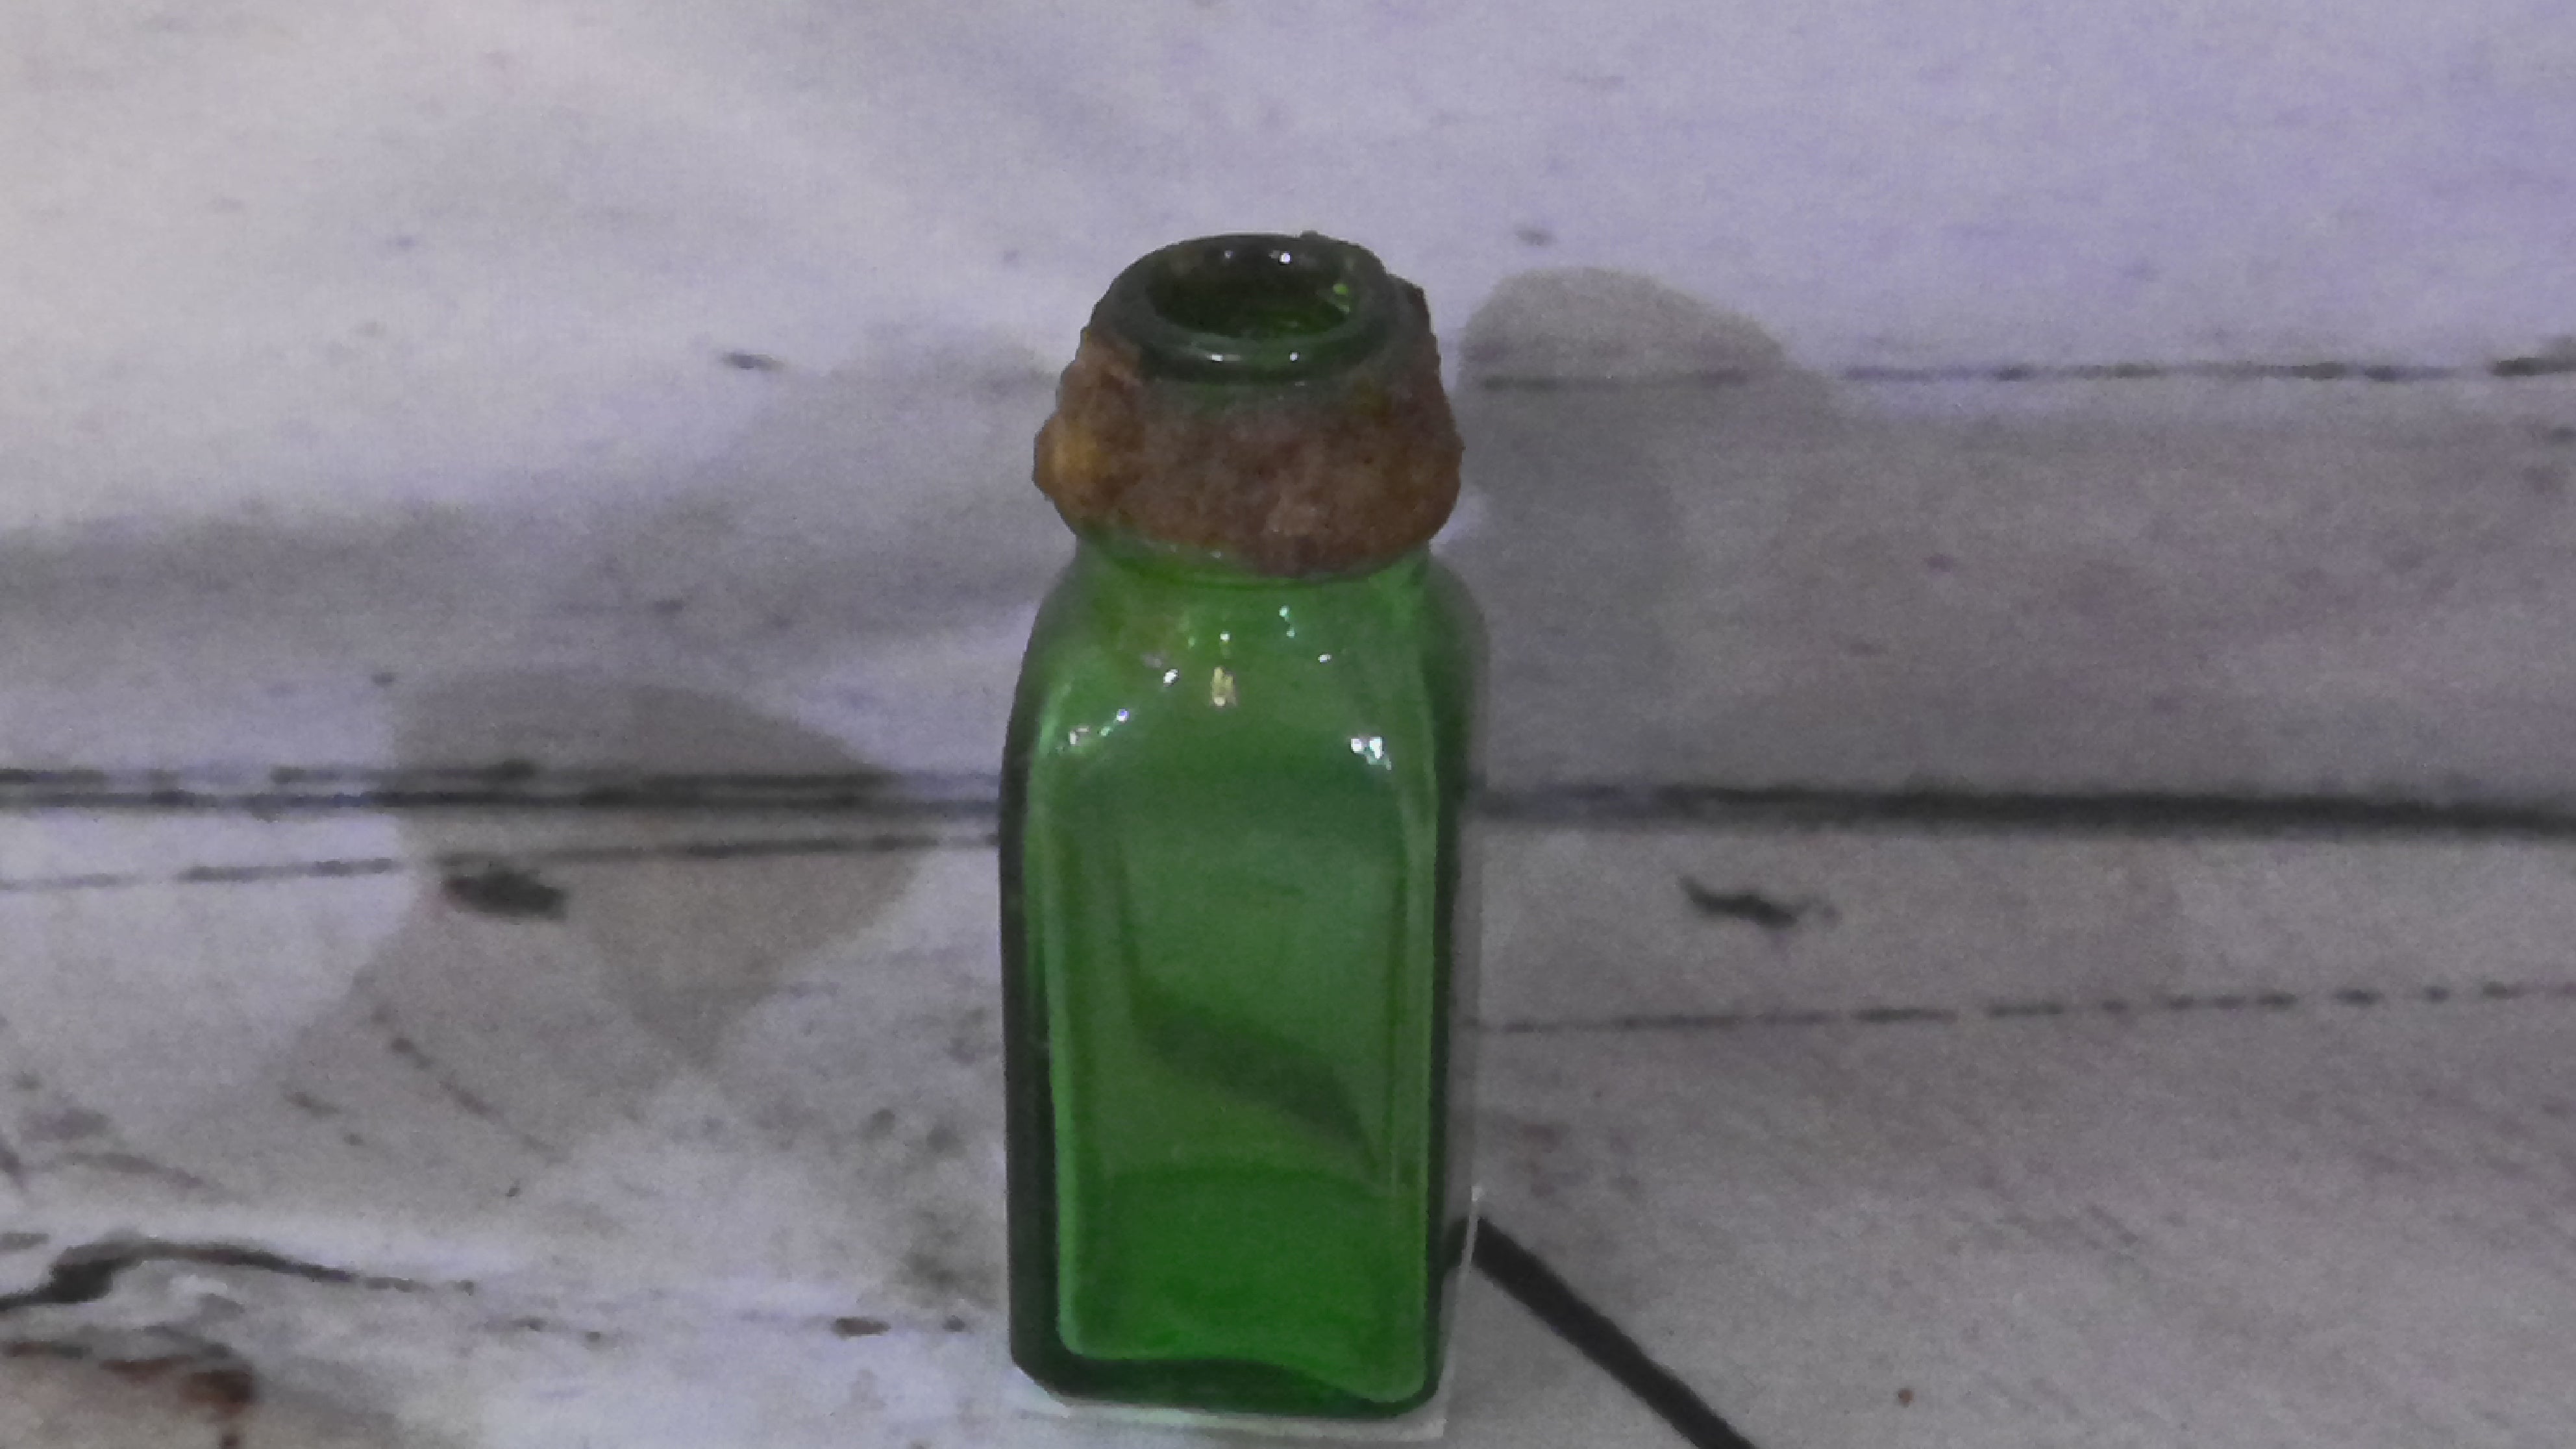 Very small green bottle